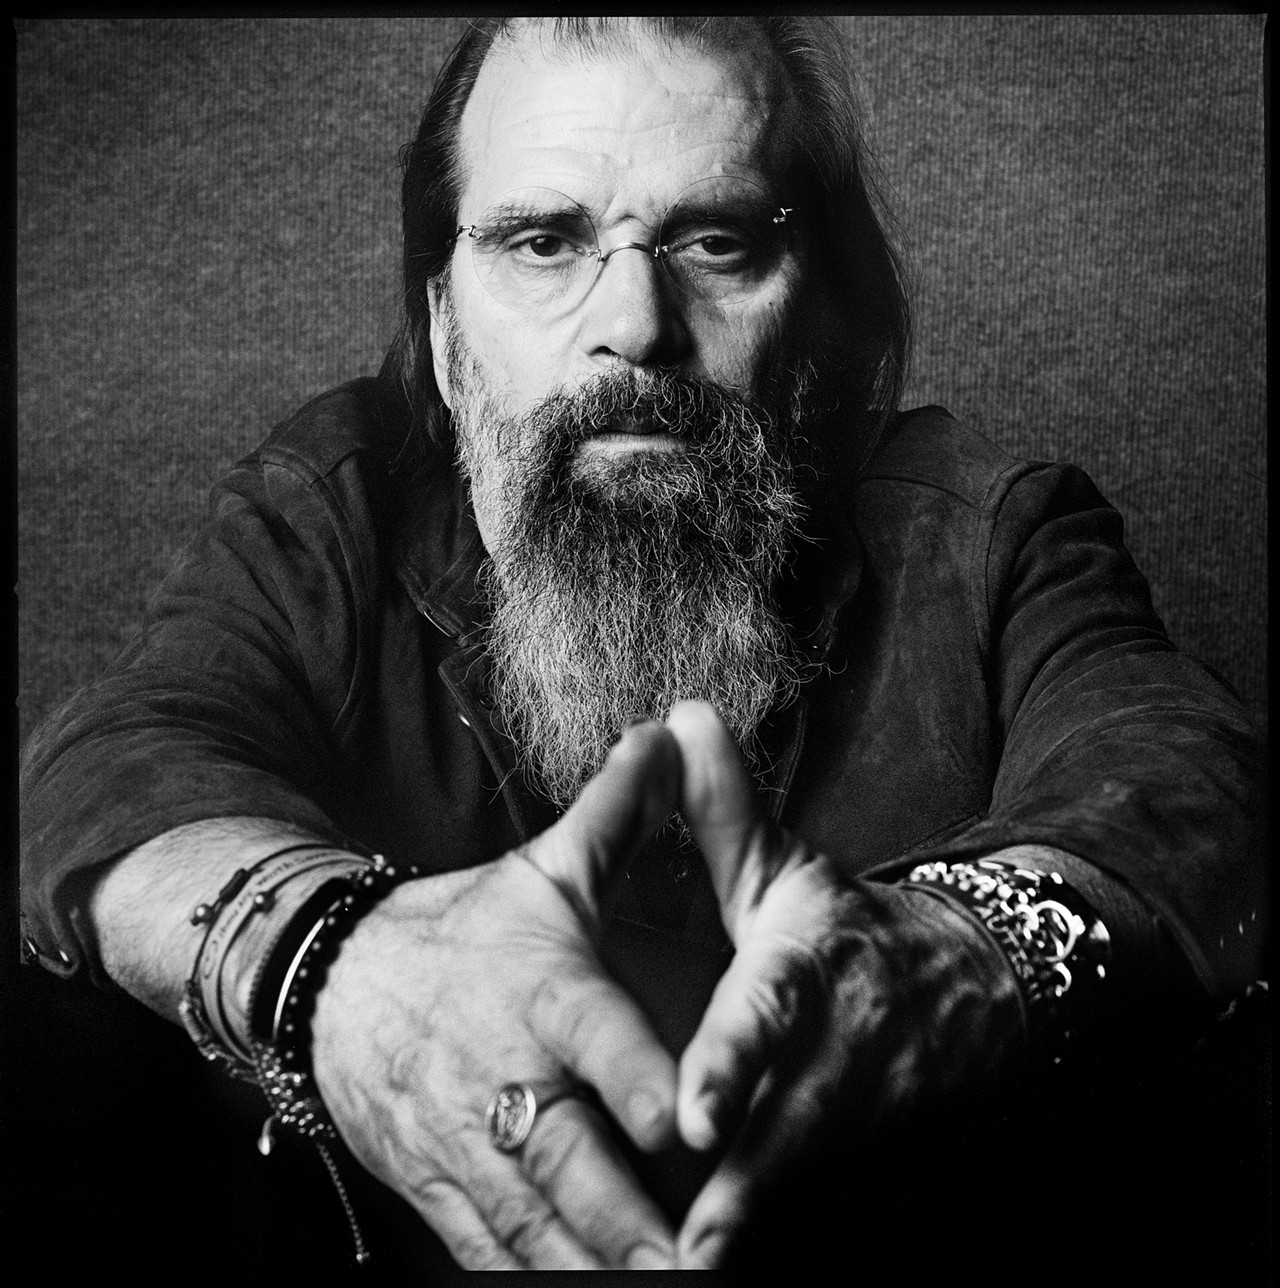 Steve Earle
Although born in Virginia, this Americana heavyweight, political activist and actor on the HBO show Treme was raised in San Antonio. By the age of 19, though, he'd headed to Nashville, where his music career first came into bloom.
Courtesy Photo / Steve Earle